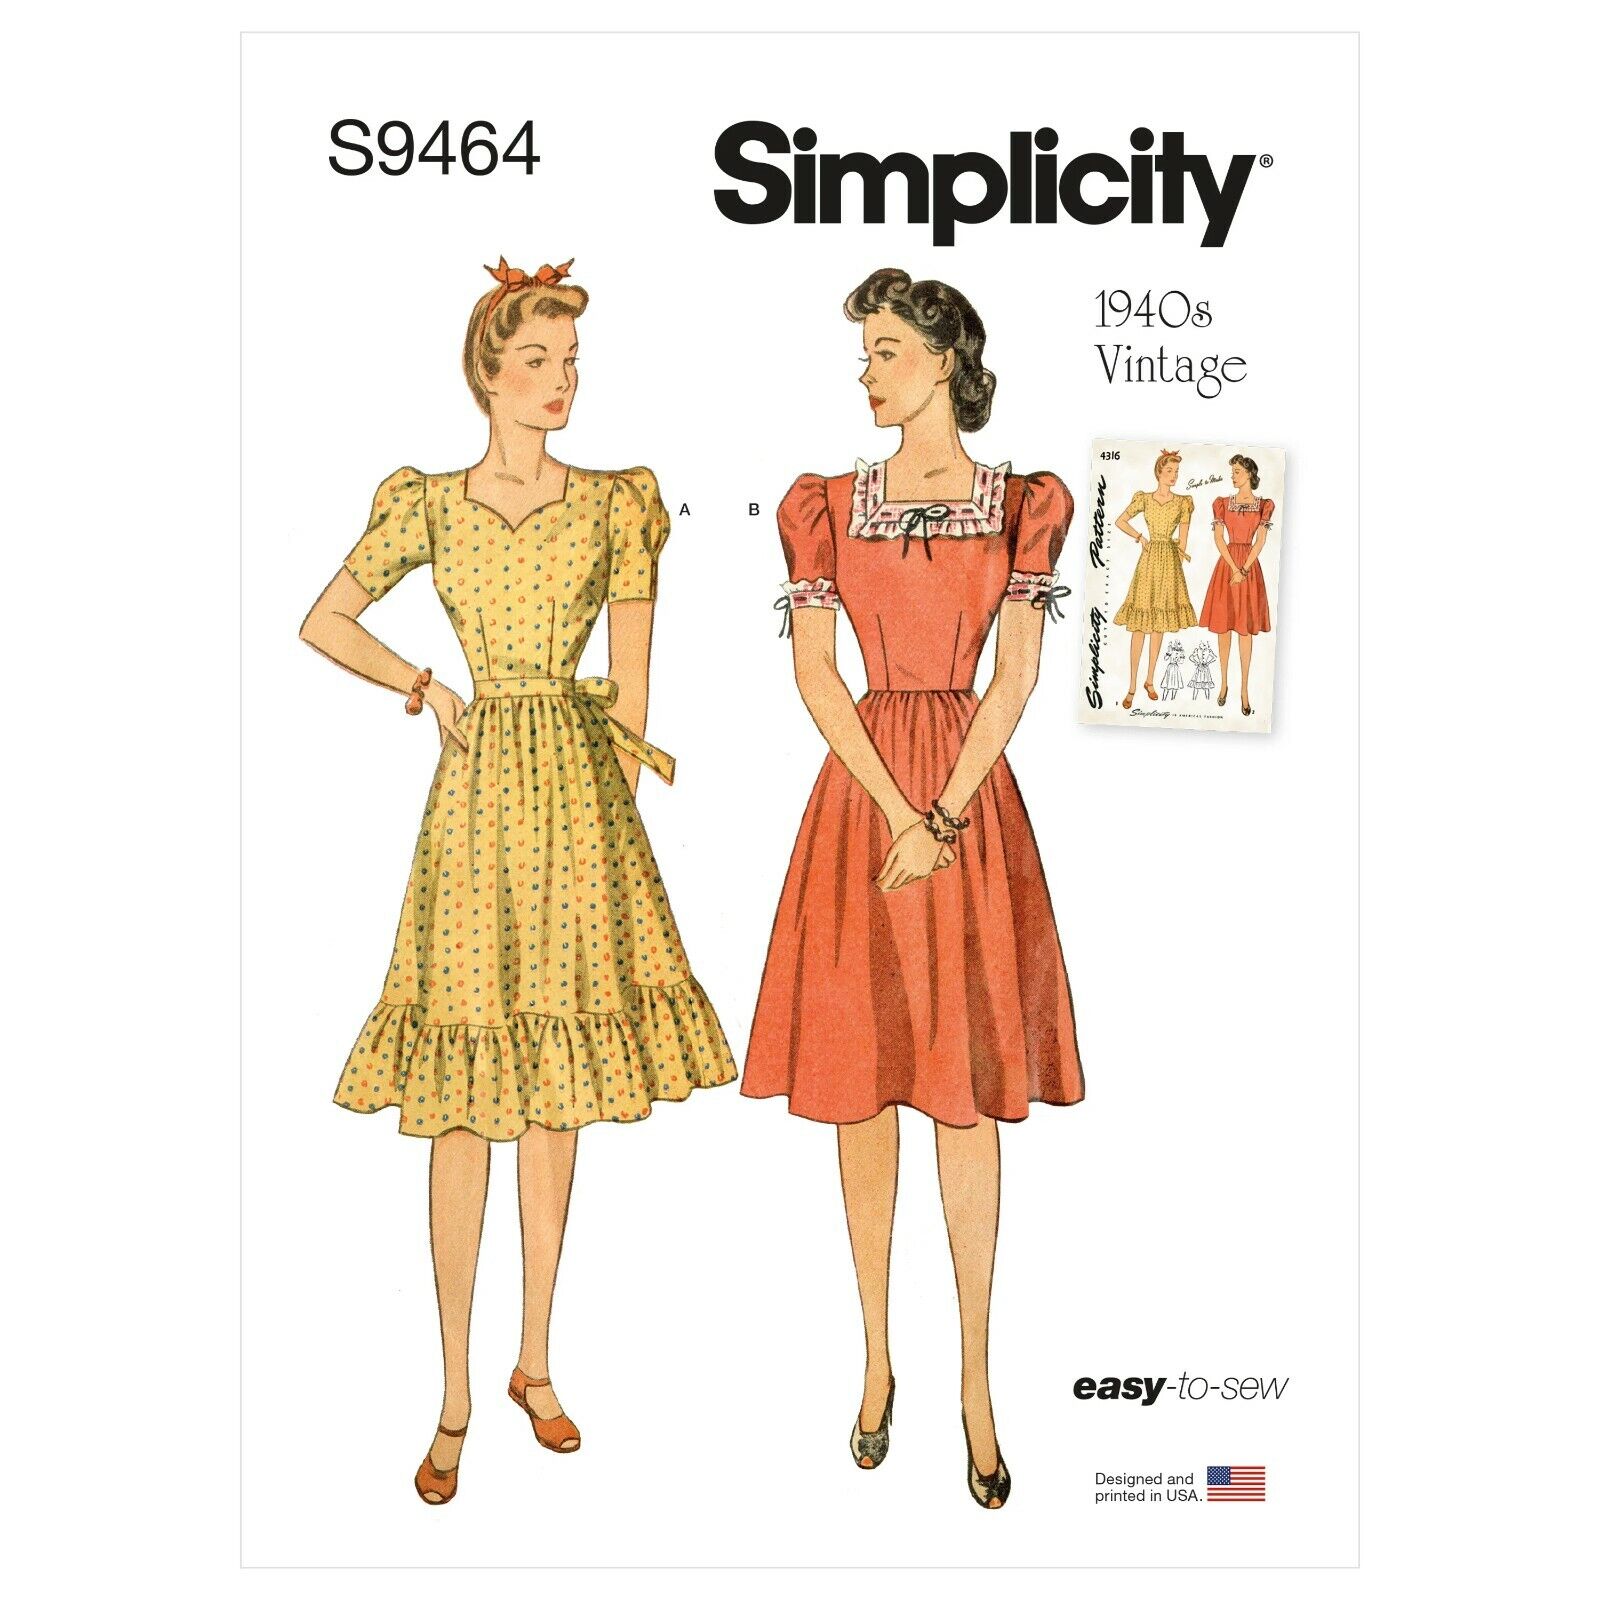 S9464 Sewing Pattern Simplicity 9464 VTG 1940s Dress EASY Size 16-24 39363694649